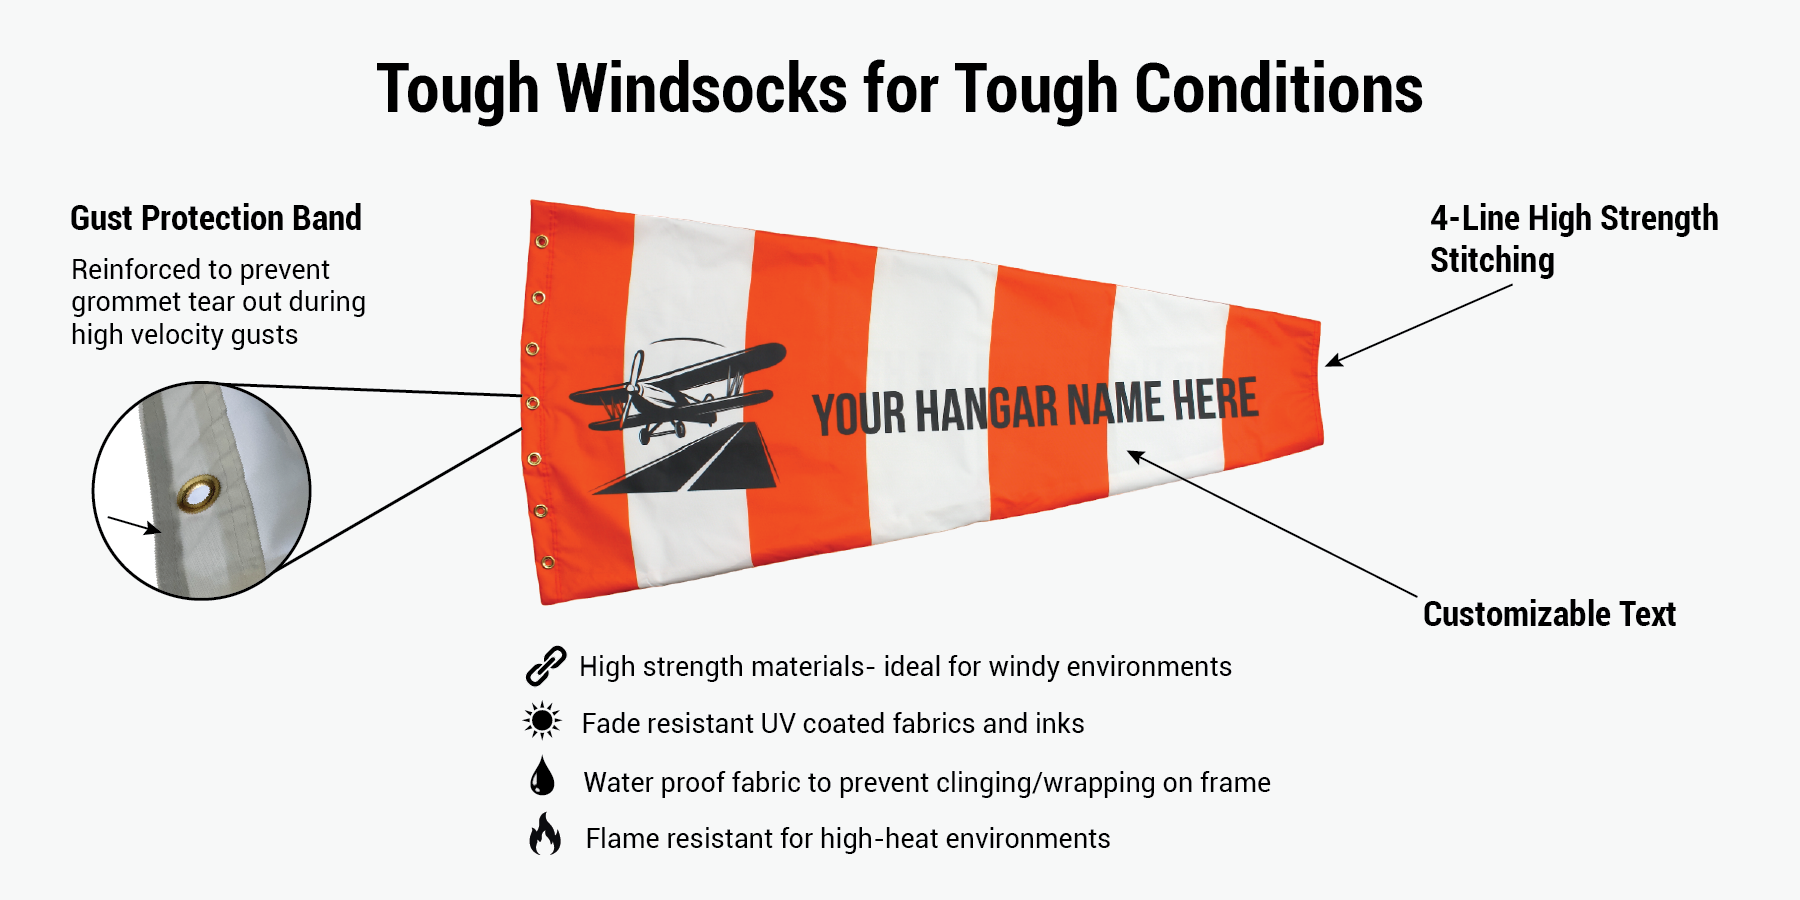 Personalized custom aviation windsock infographic for hangars, air strips and airports